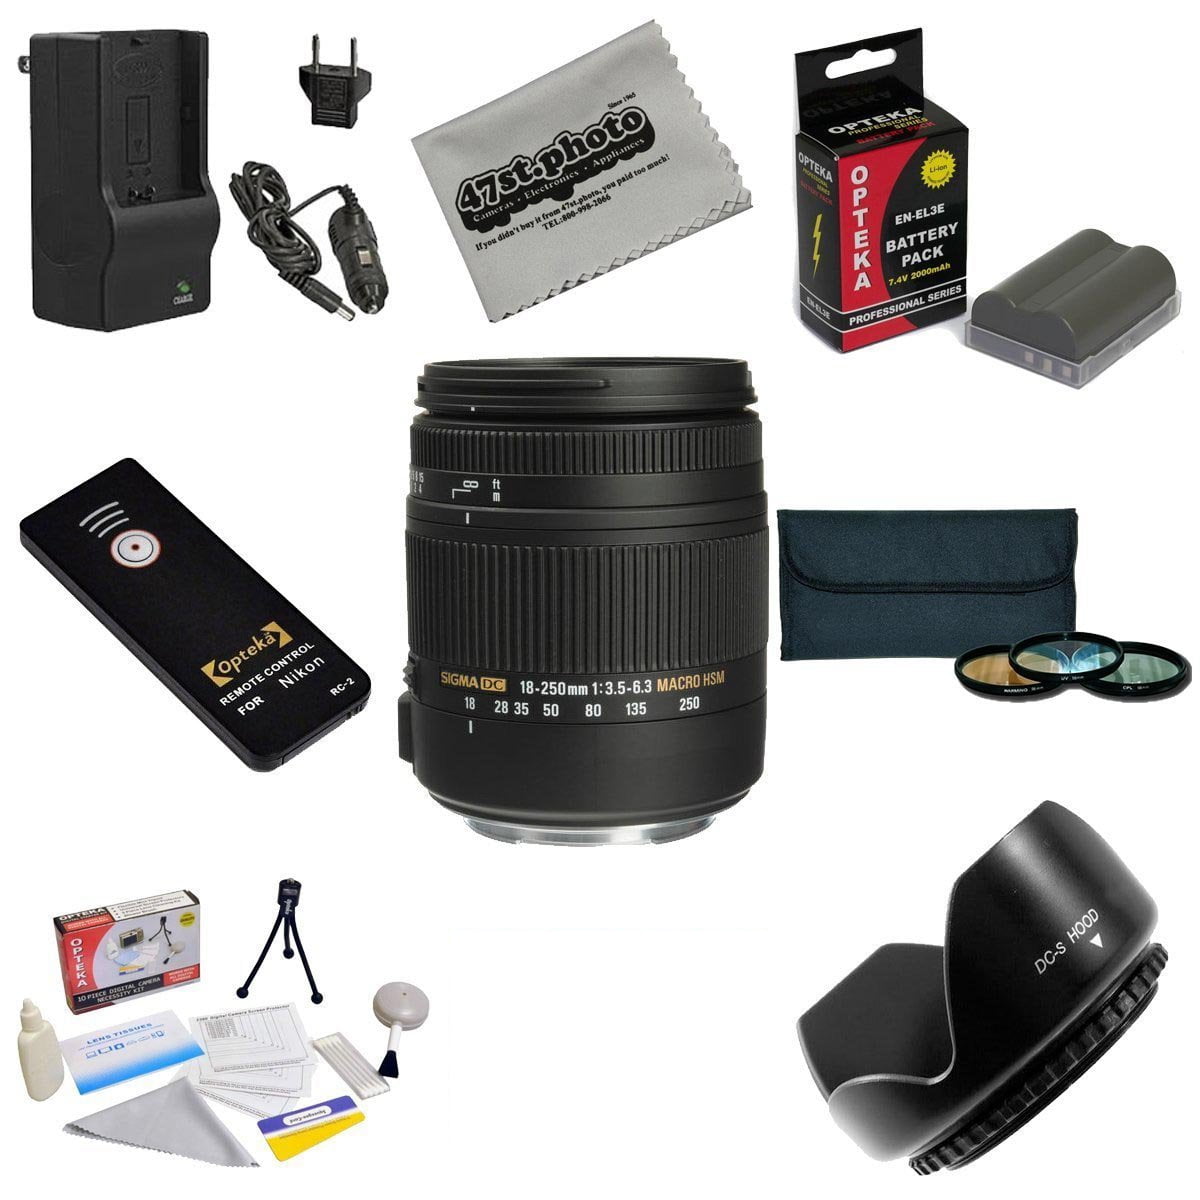 redactioneel Infrarood Durven Sigma Super Zoom 18-250mm f/3.5-6.3 DC Macro OS HSM (Optical Stabilizer)  883-306 Lens With 3 Year Extended Lens Warranty For the Nikon D700 D300S  D300 D200 D100 D90 D80 D70 D70s D50 -